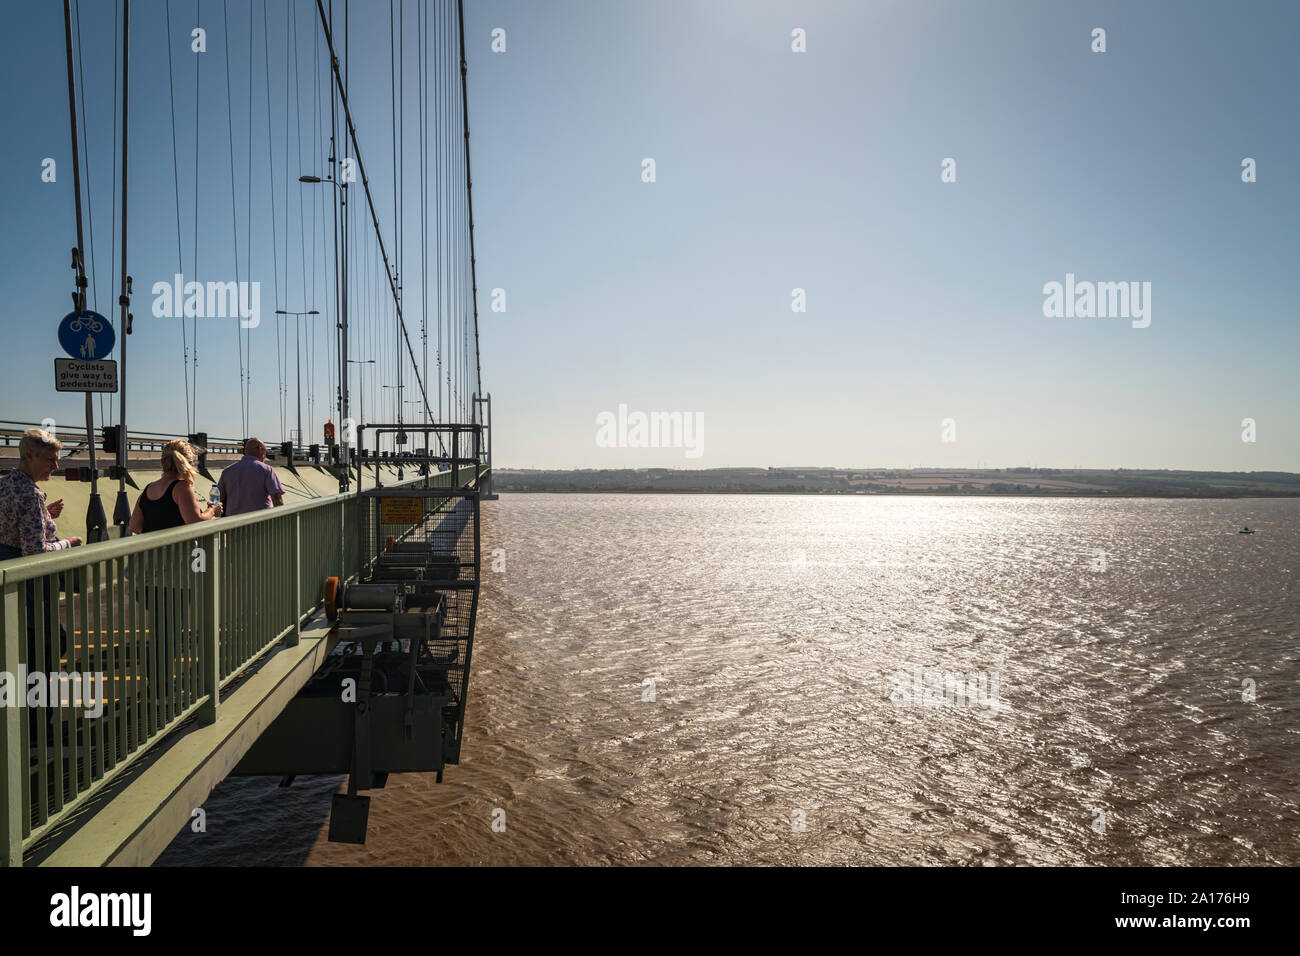 The west side walkway on the Humber Bridge crossing the River Humber from Hessle, Yorkshire to Barton on Humber, Lincolnshire. England. 21 Sept 2019 Stock Photo